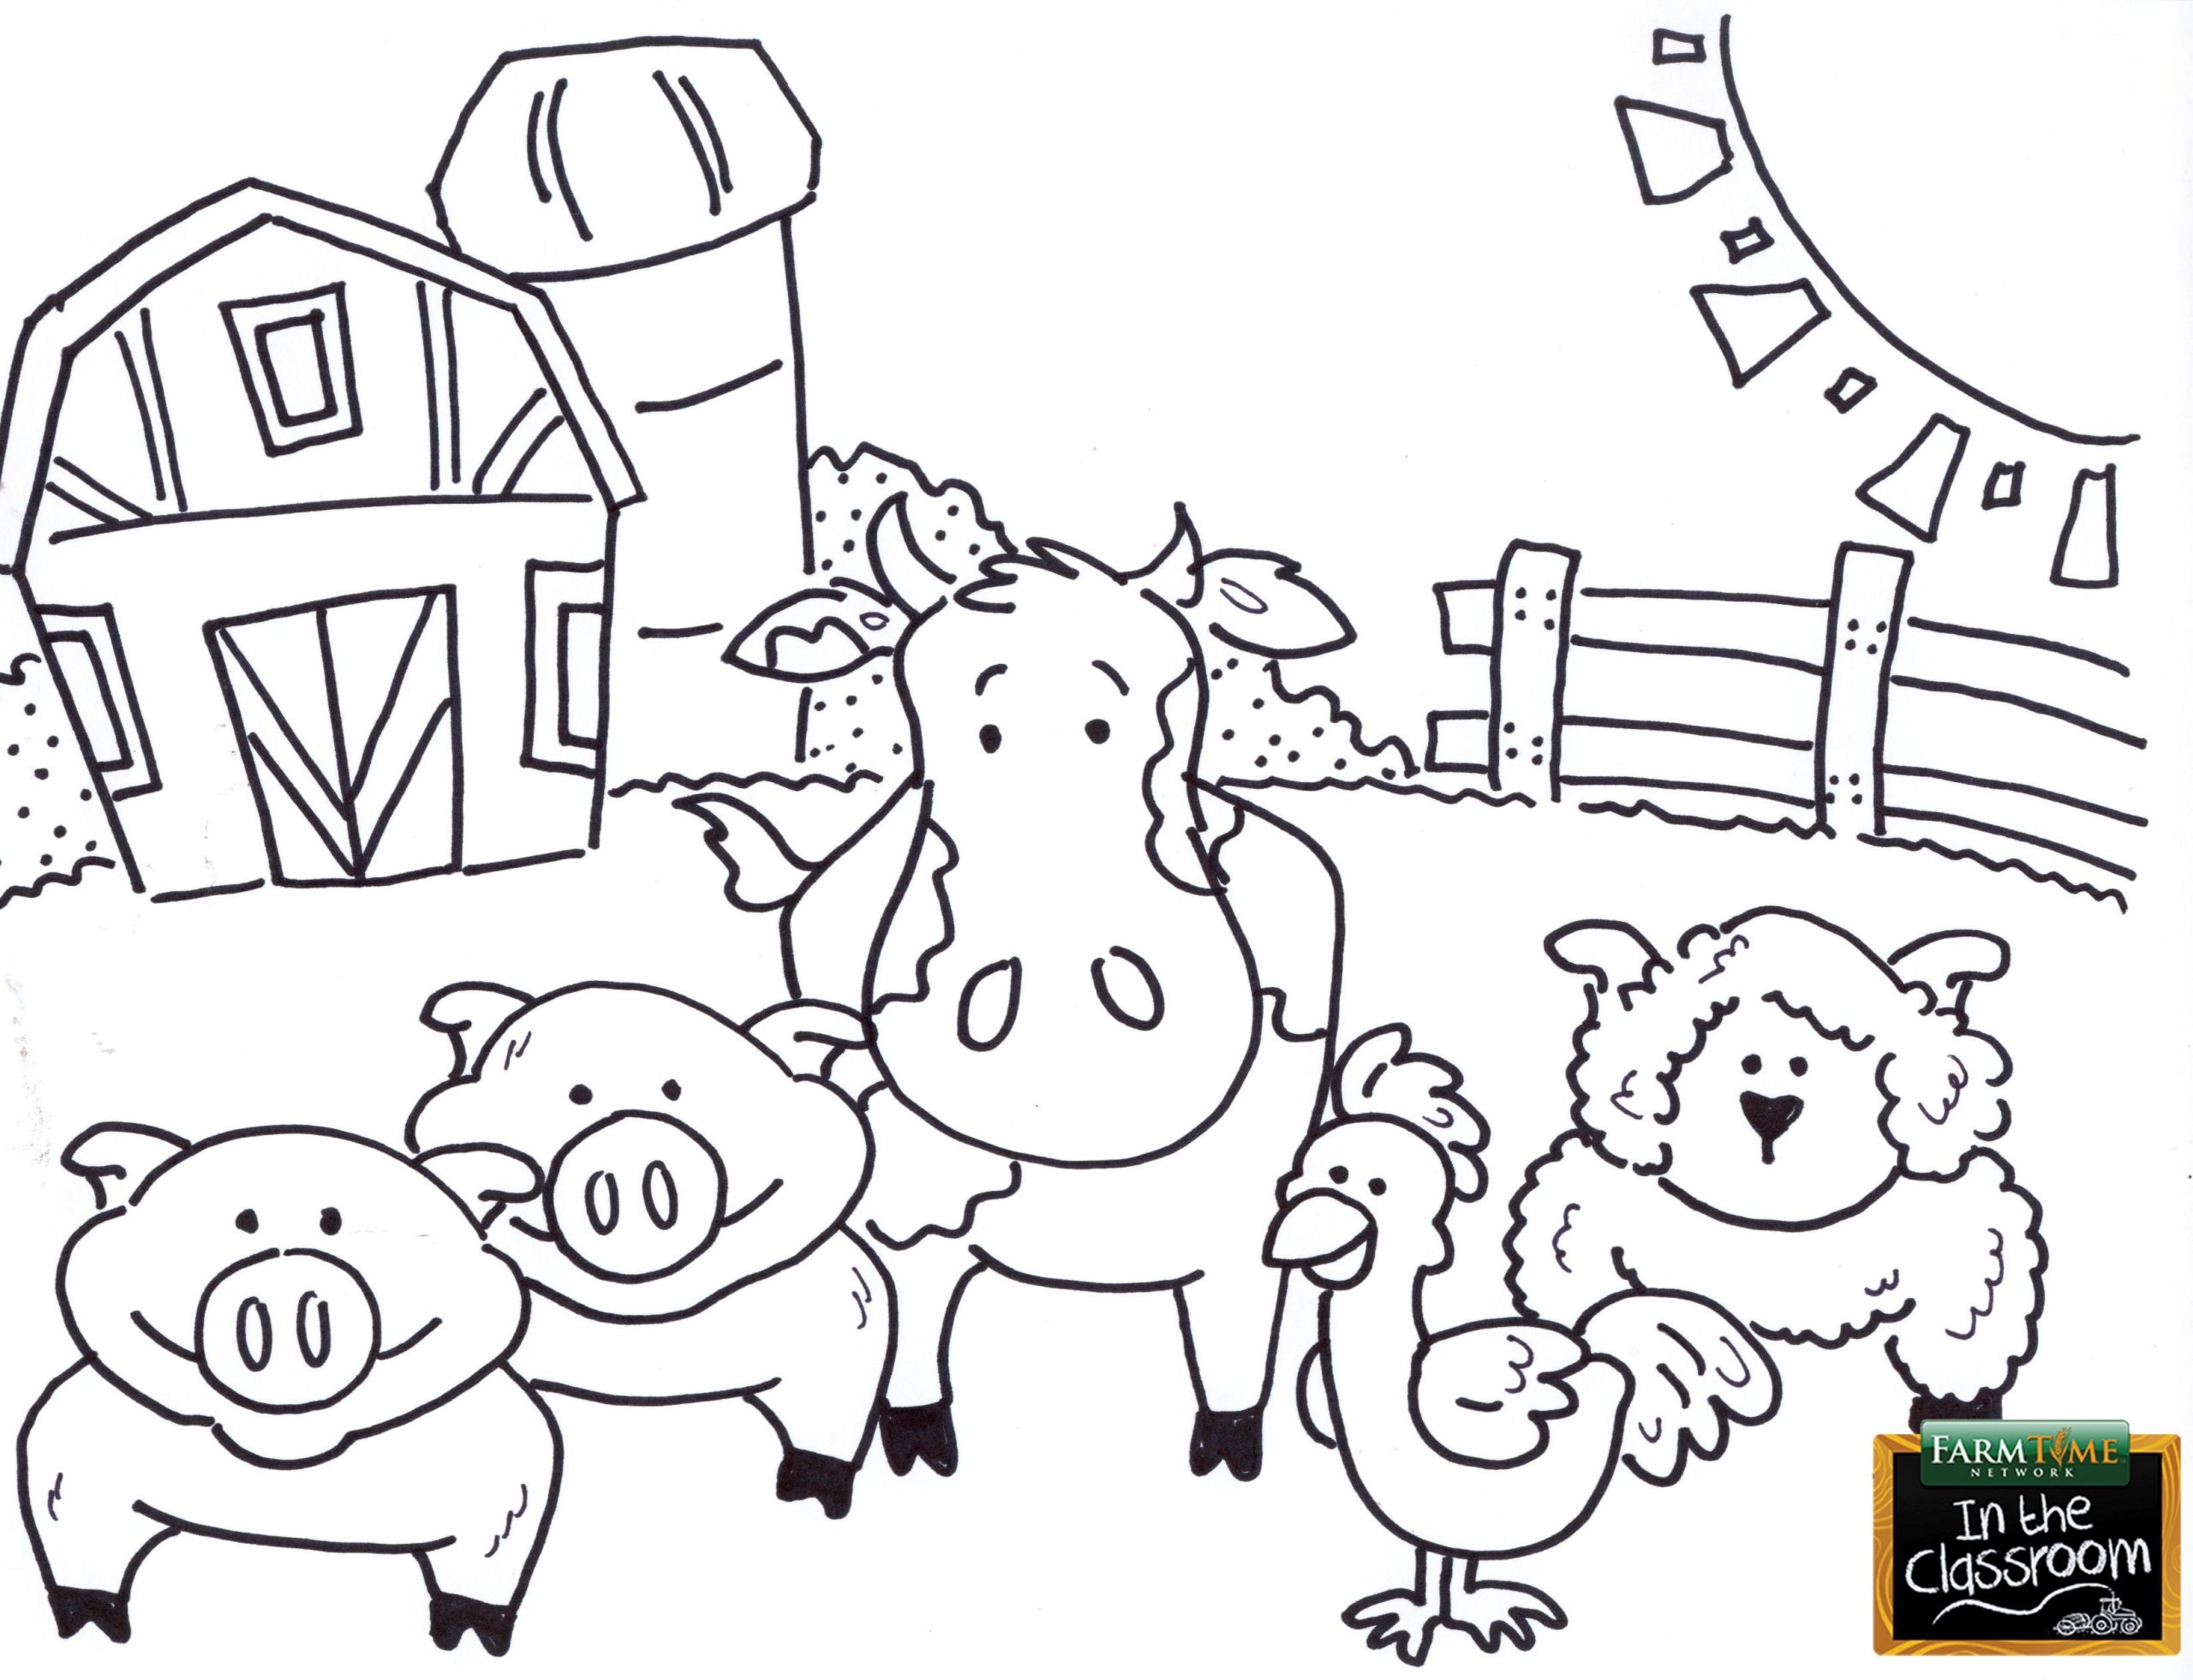 Farm Coloring Pages For Kids
 Pin by Caiah Wagner on Agriculture